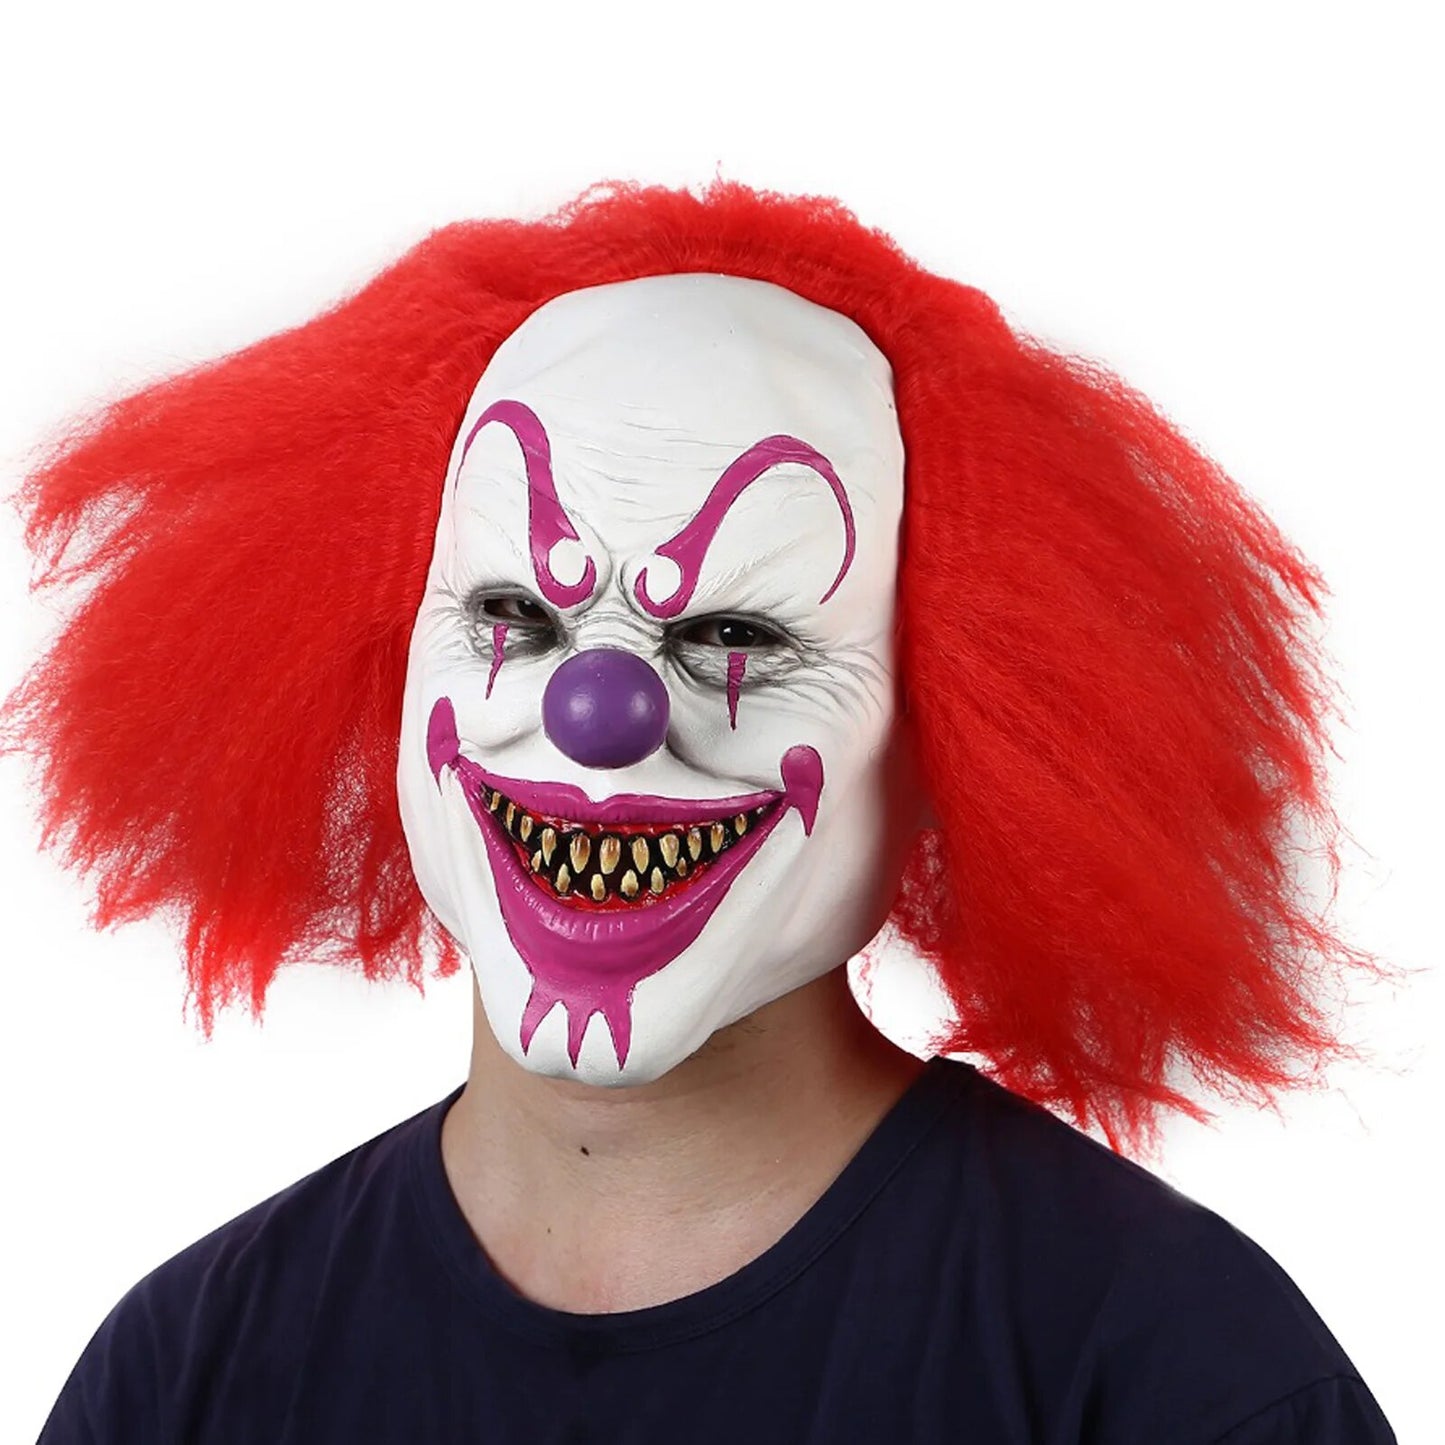 Red Hair Clown Mask Halloween Party Red Eye Latex Headgear Terror Costume Masquerade Cosplay Props For Adult And Children